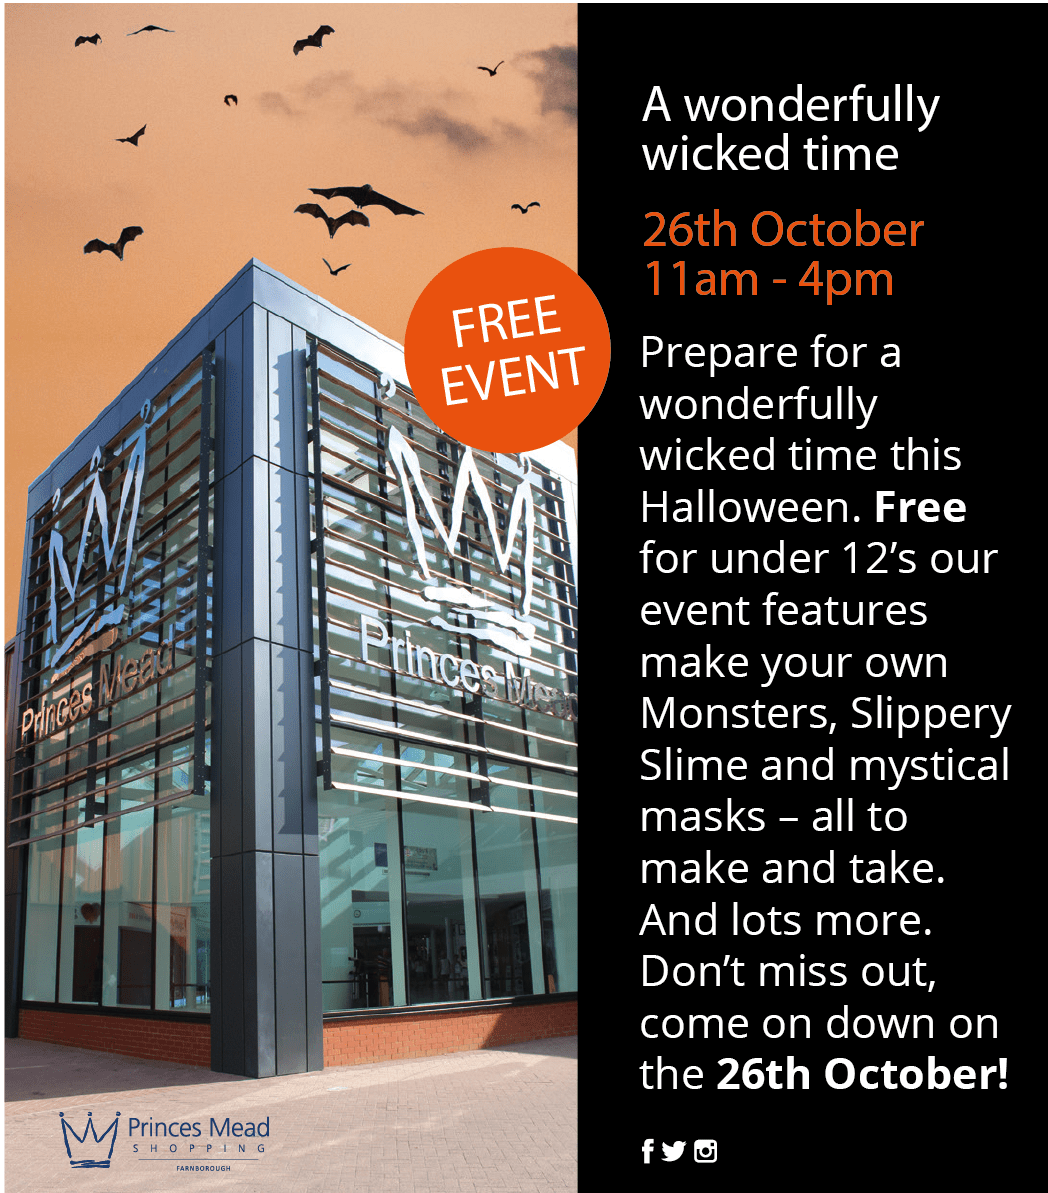 free Halloween event for under 12s